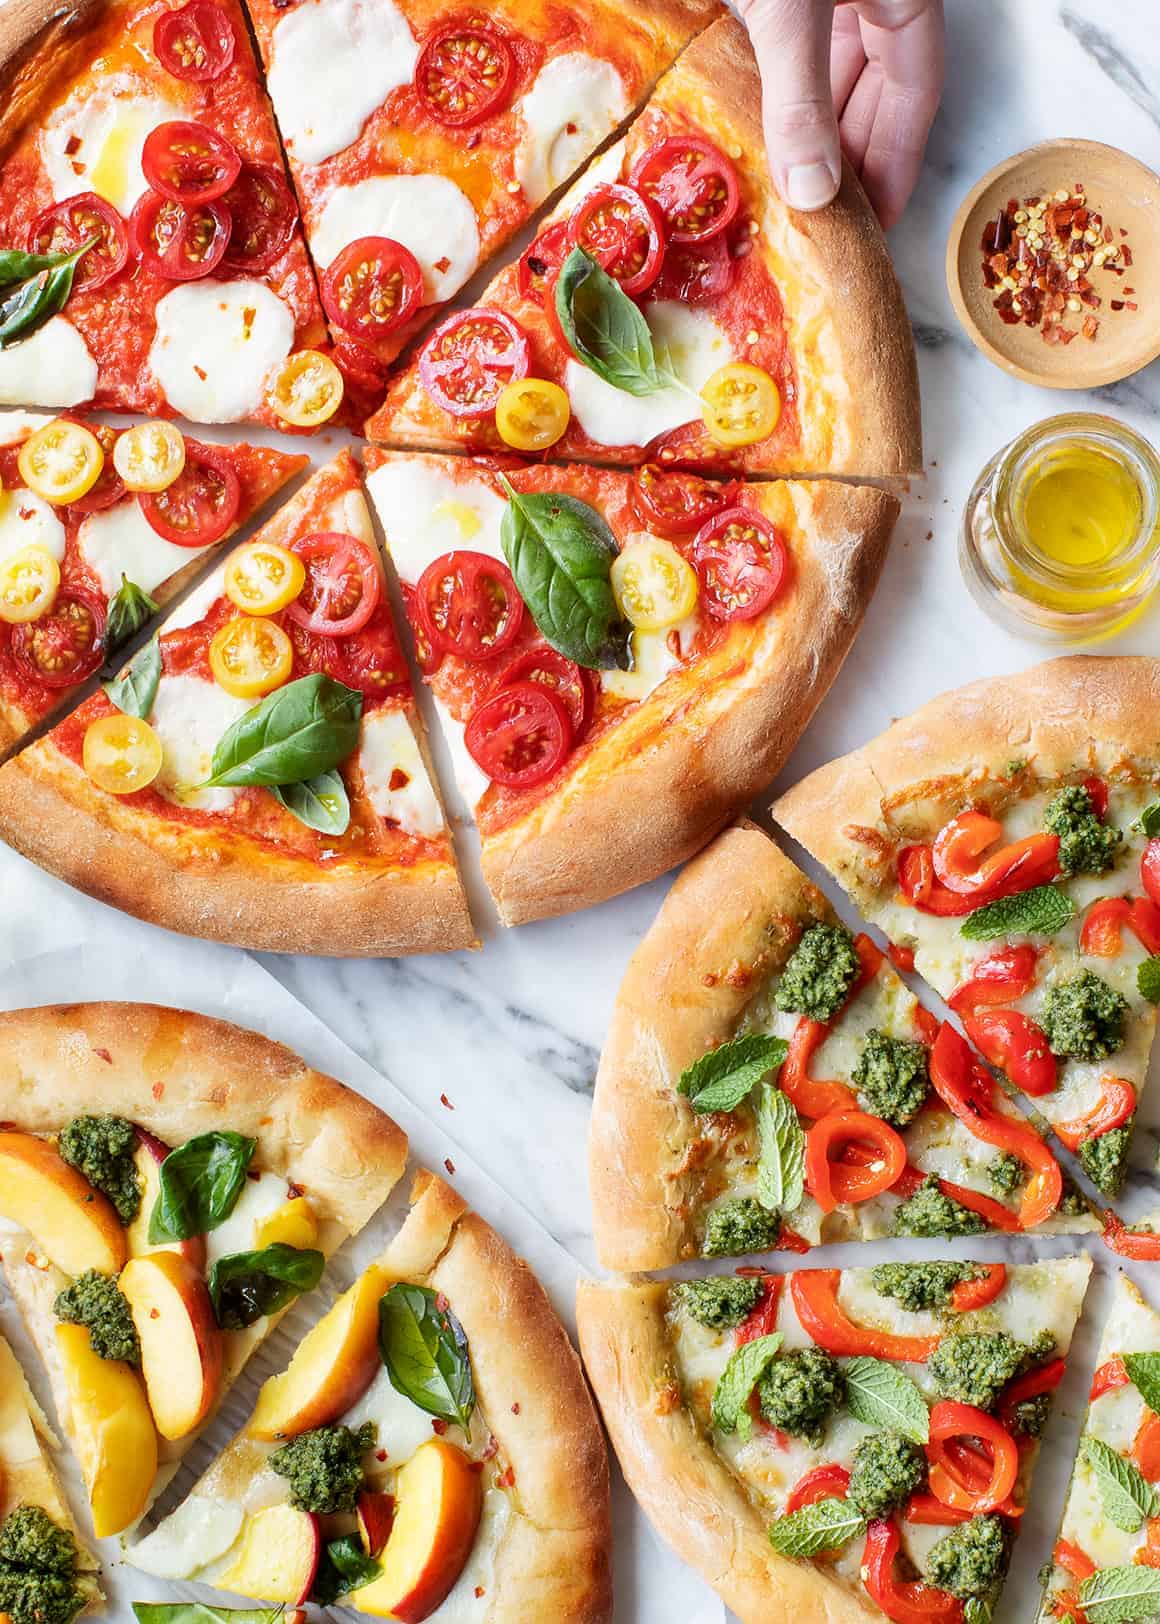 pizza topping ideas - 3 pizzas with tomatoes, cheese, basil, and pesto